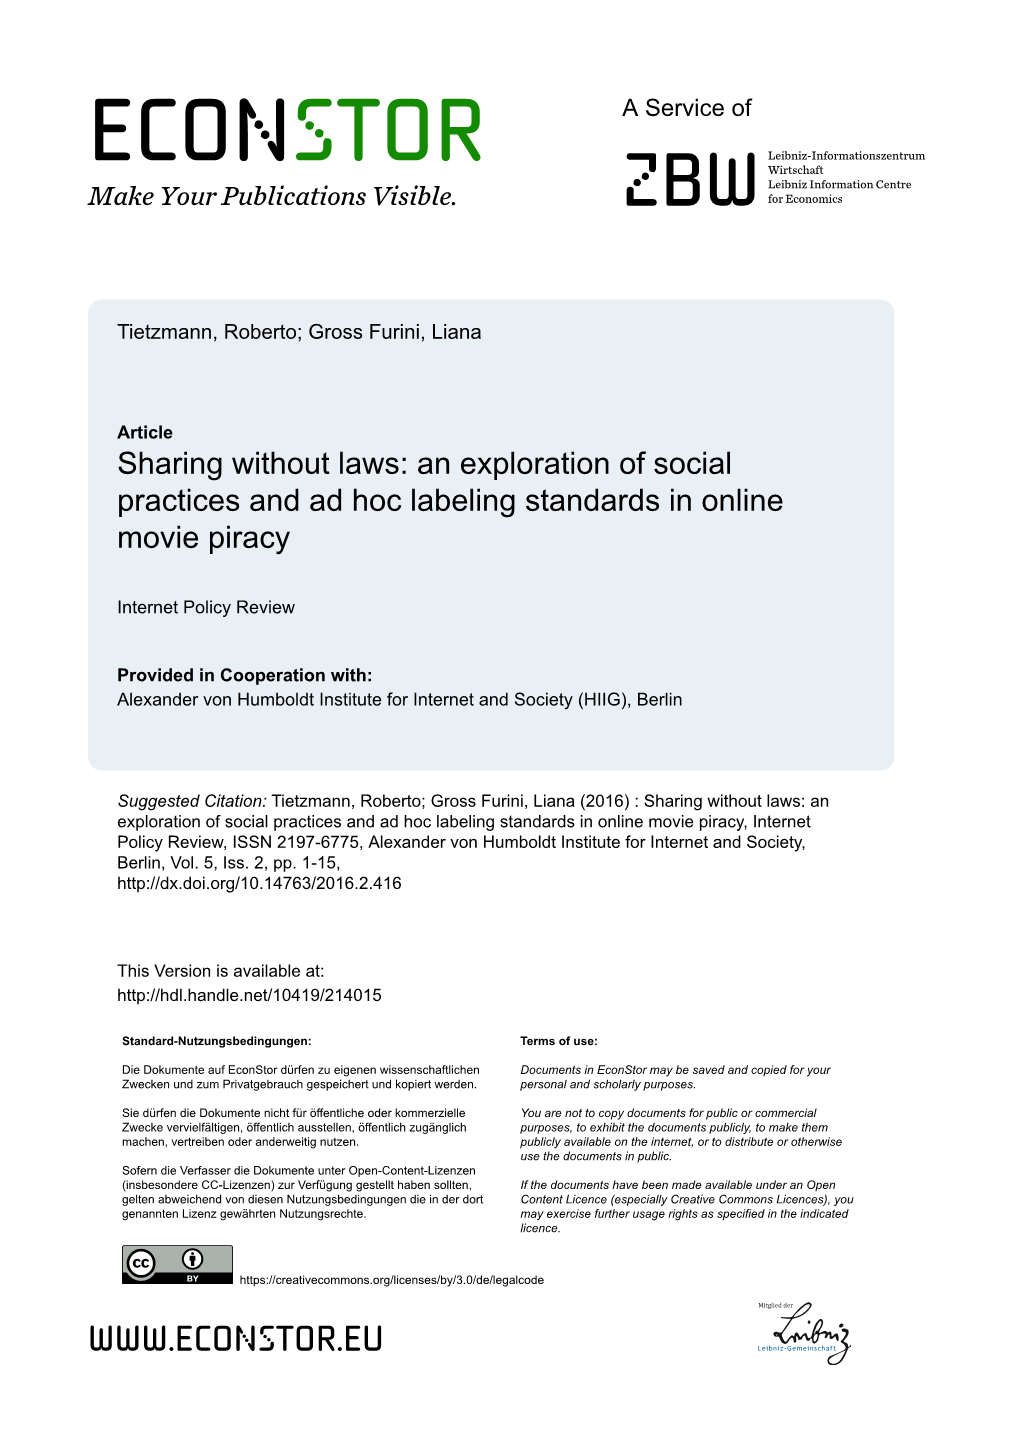 An Exploration of Social Practices and Ad Hoc Labeling Standards in Online Movie Piracy